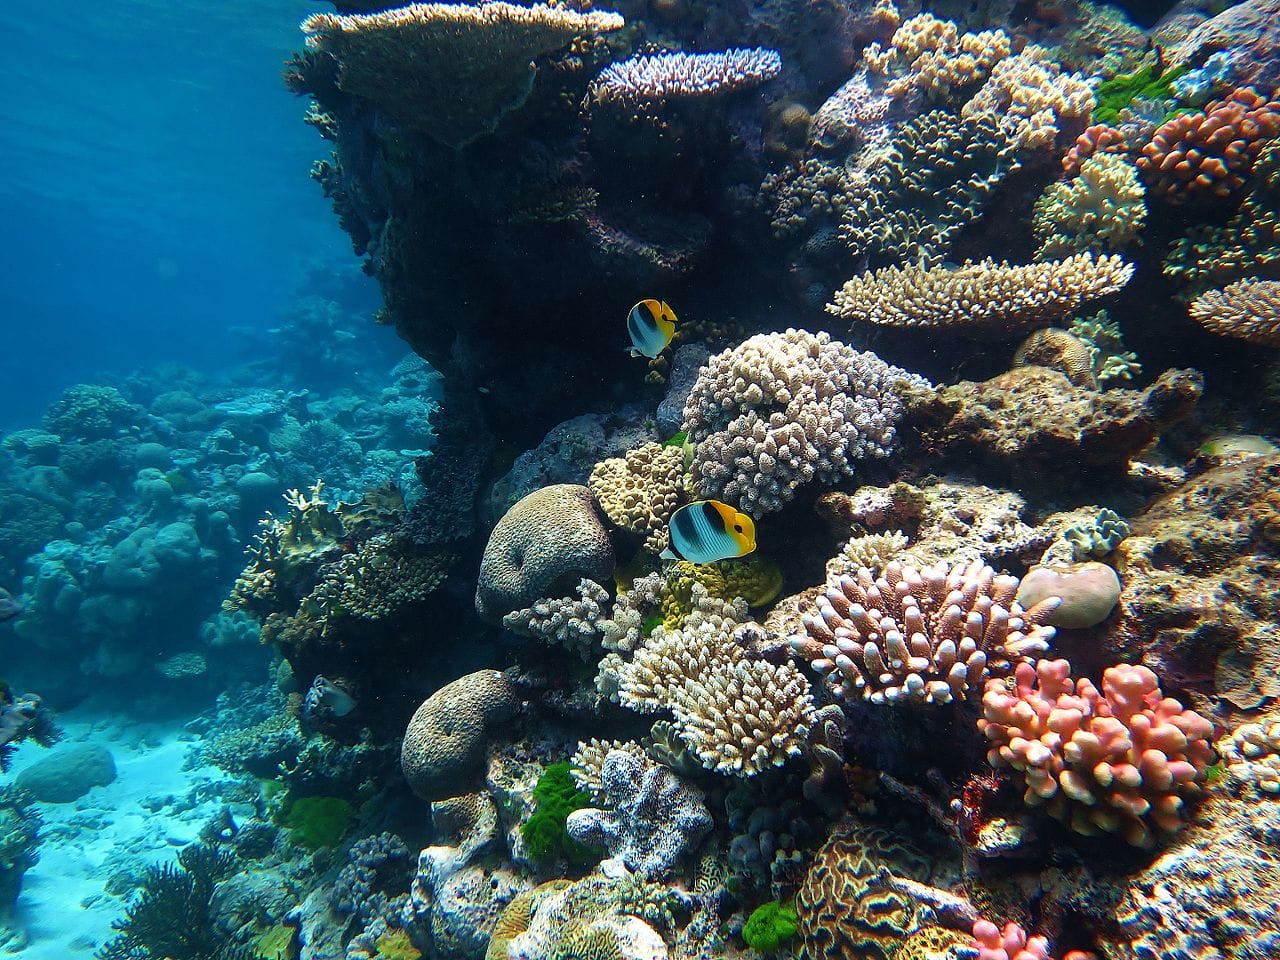 What Is Going on with the World’s Corals, What Is Being Done and What Can You Do